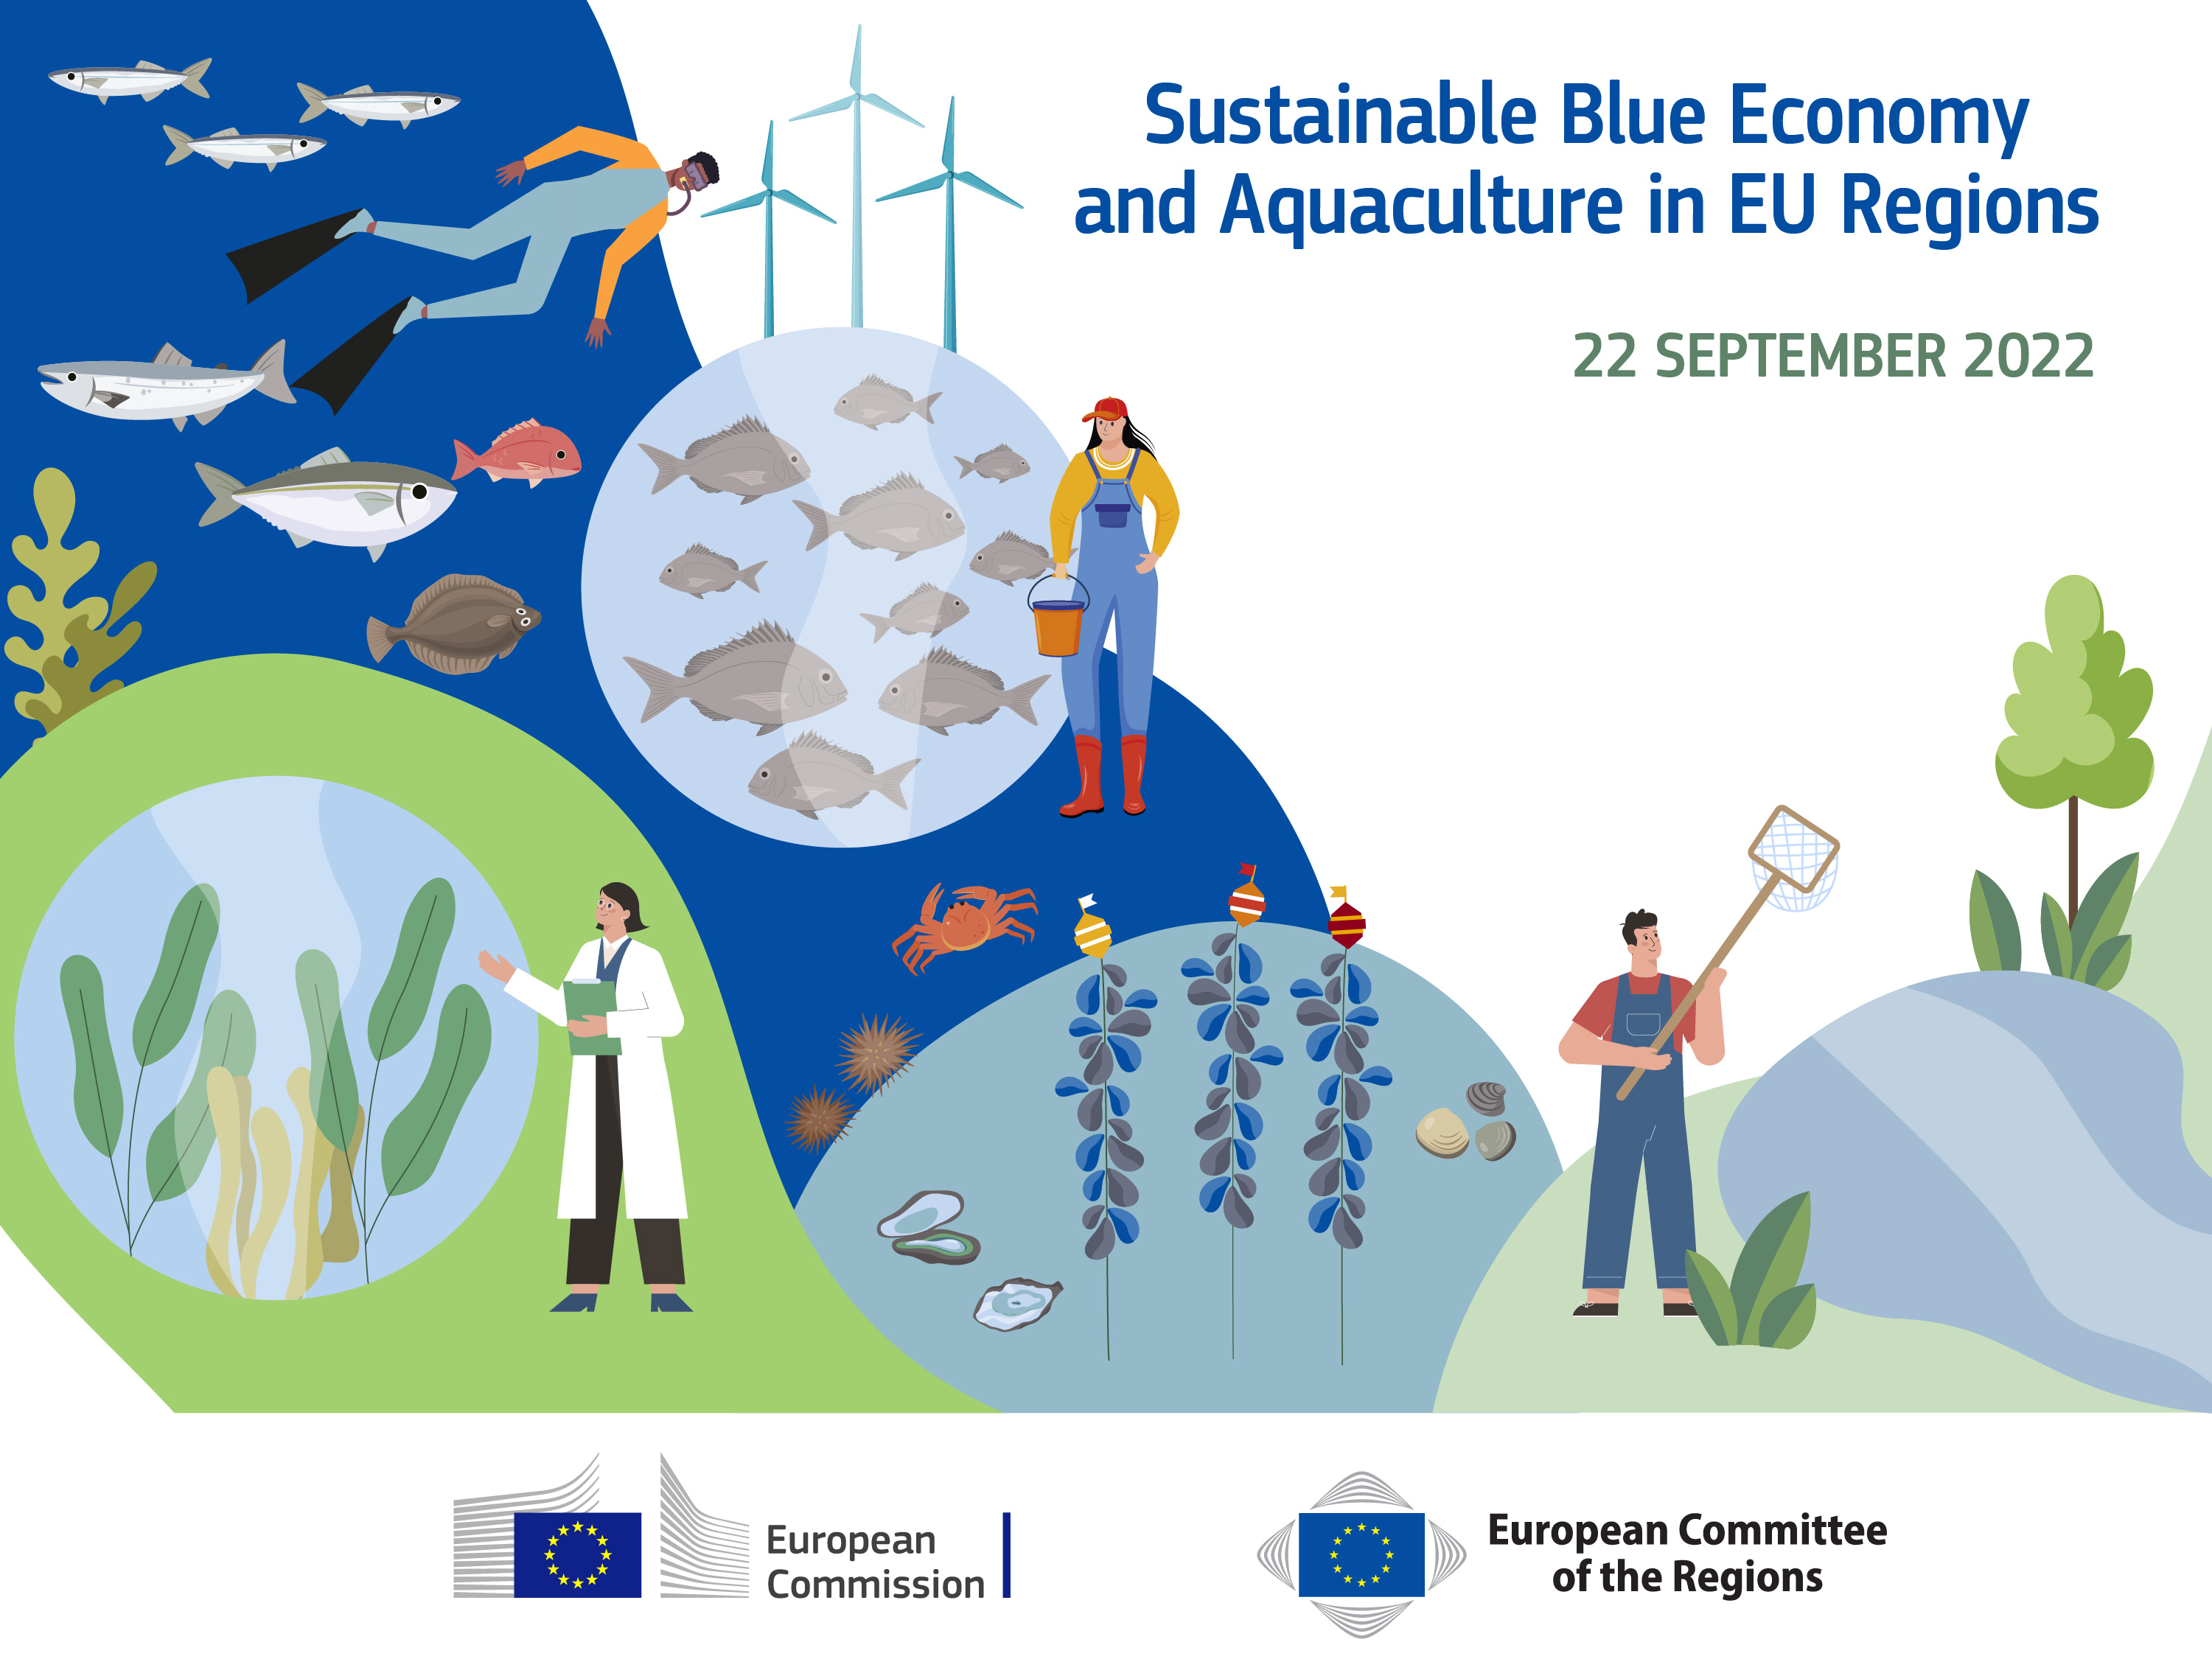 Sustainable blue economy and aquaculture in EU regions